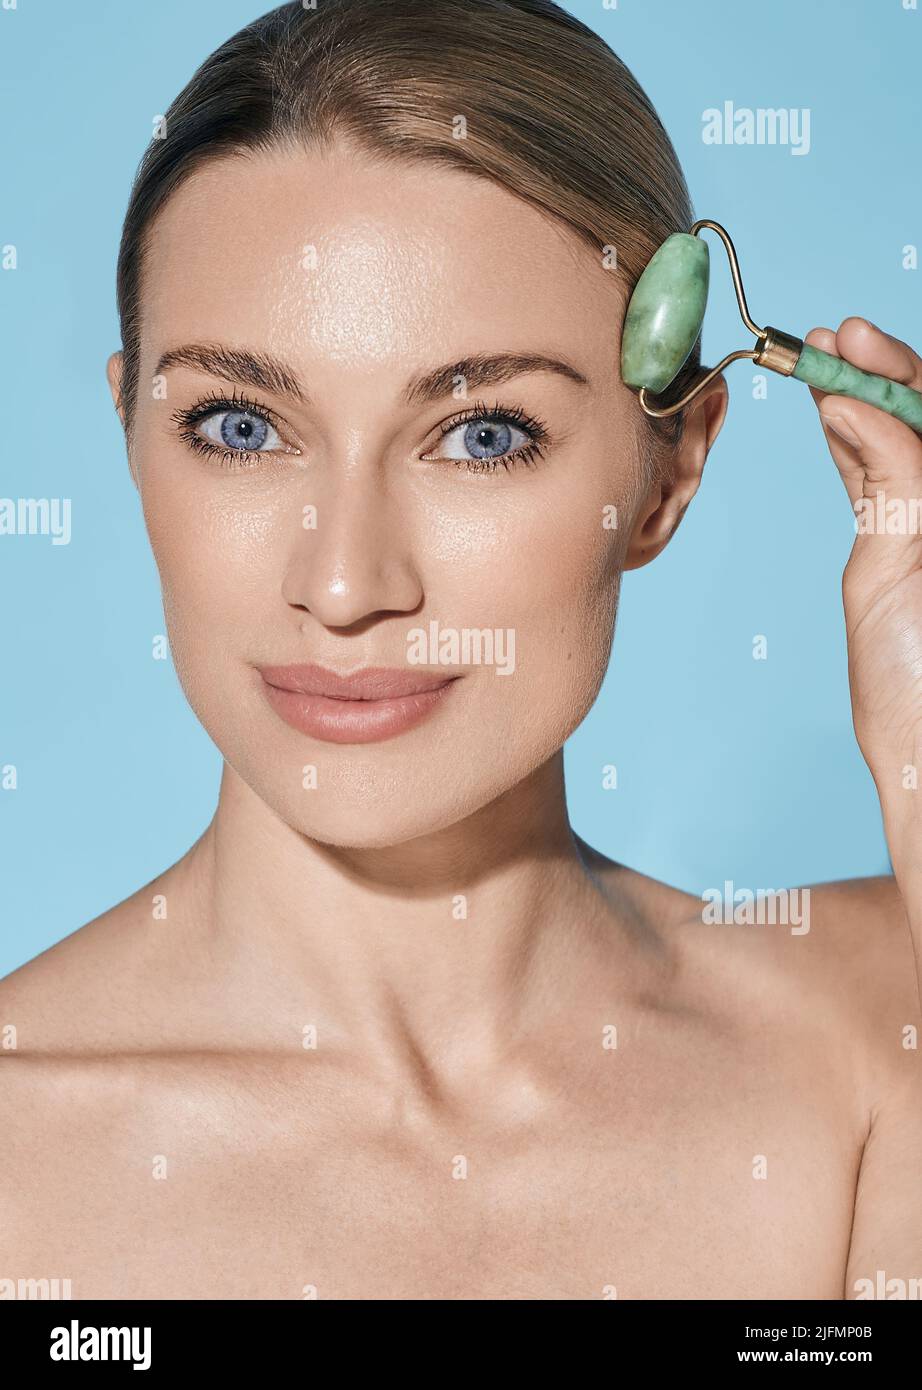 Portrait of adult woman using jade roller or stone roller for facial lifting procedure Stock Photo